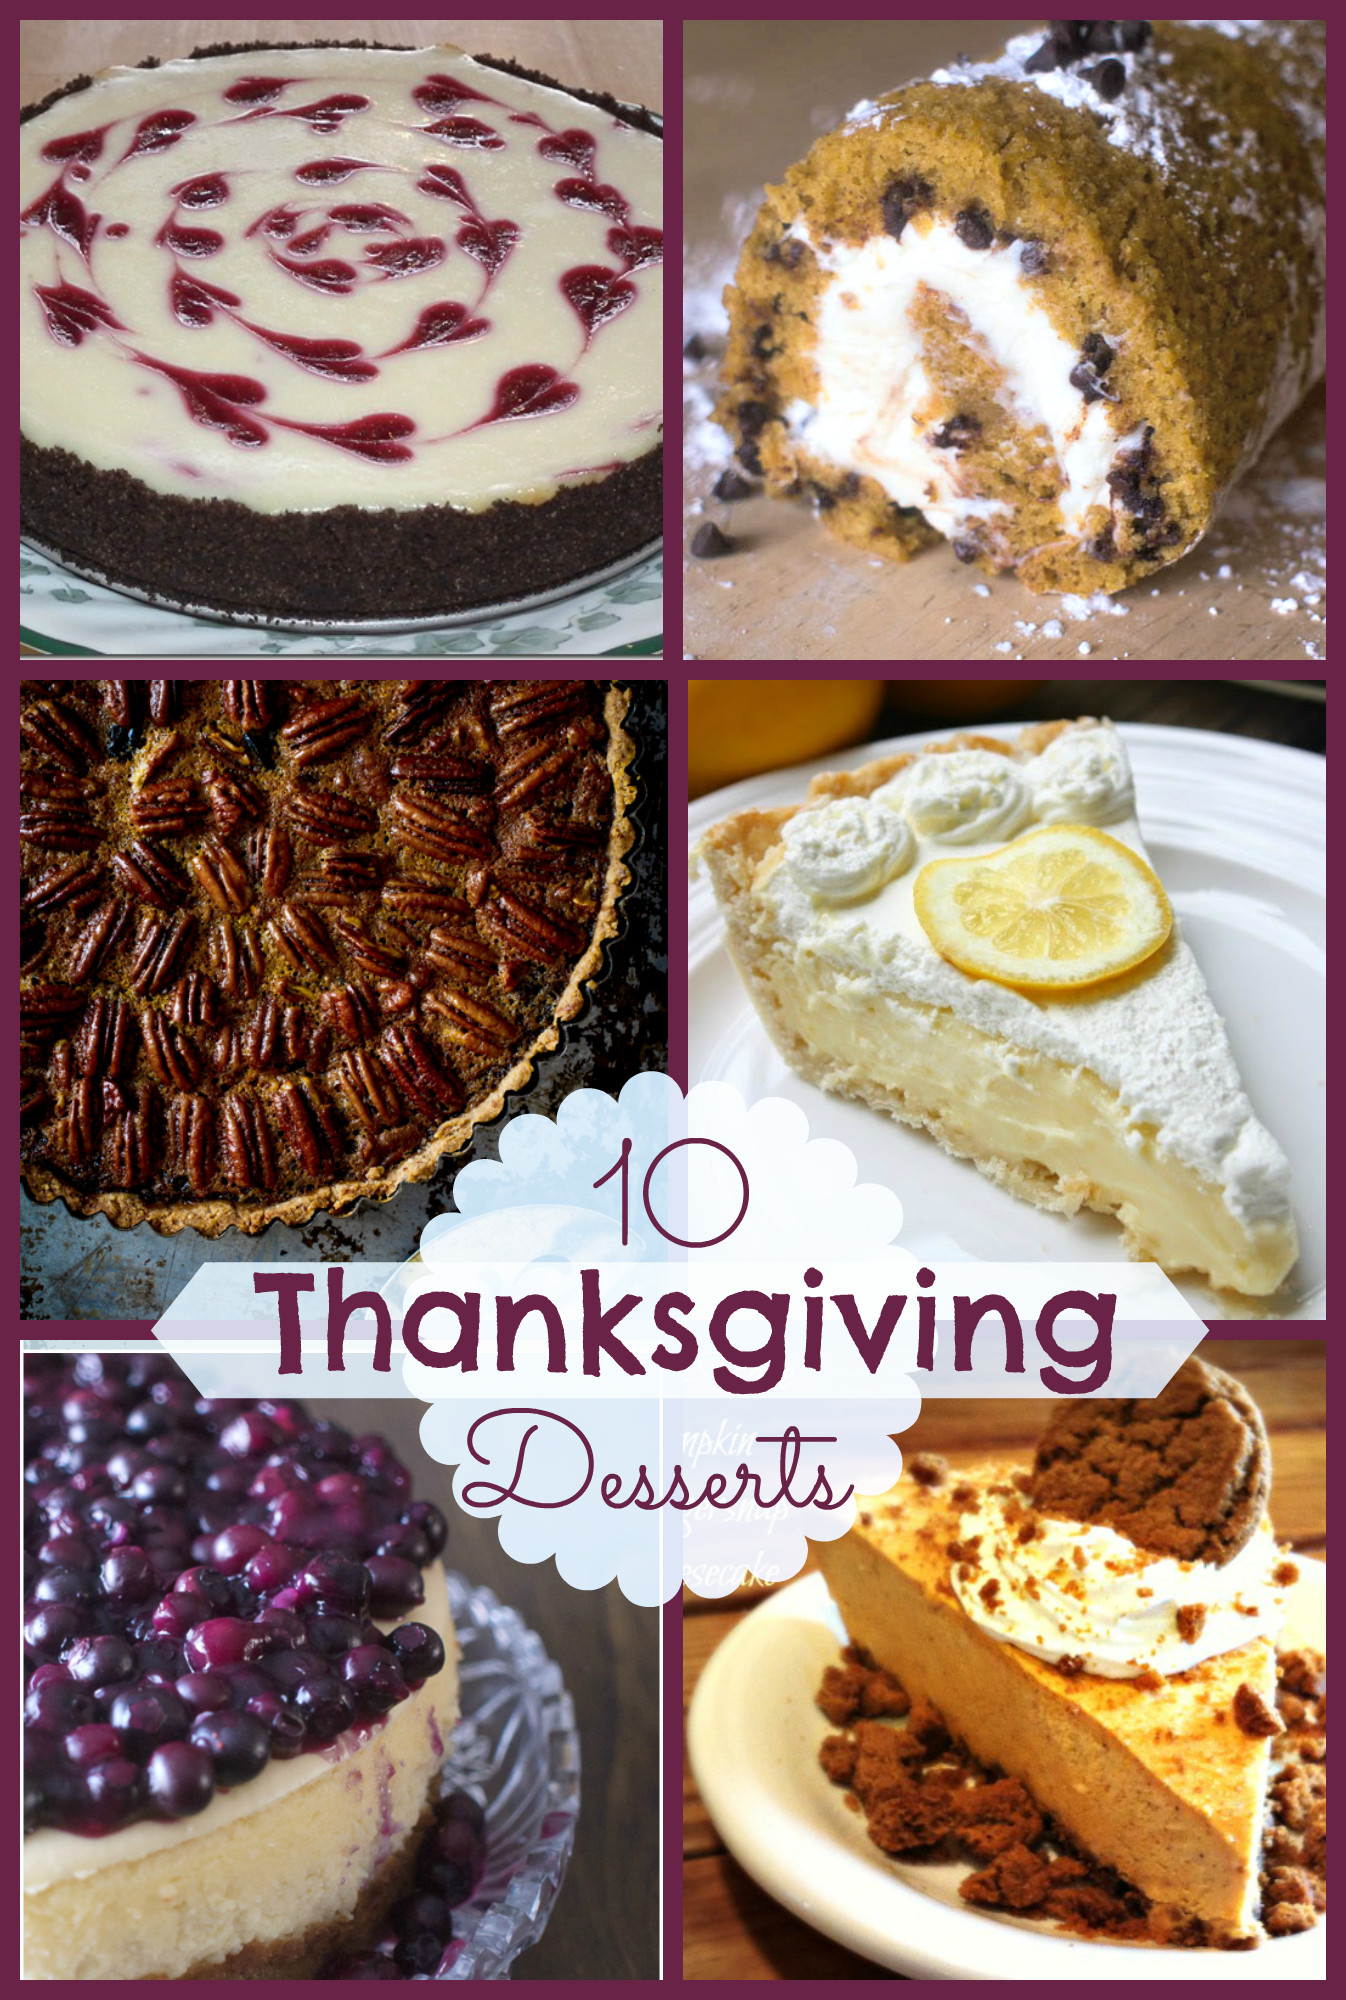 Thanksgiving Pies And Cakes
 10 Fabulous Thanksgiving Desserts